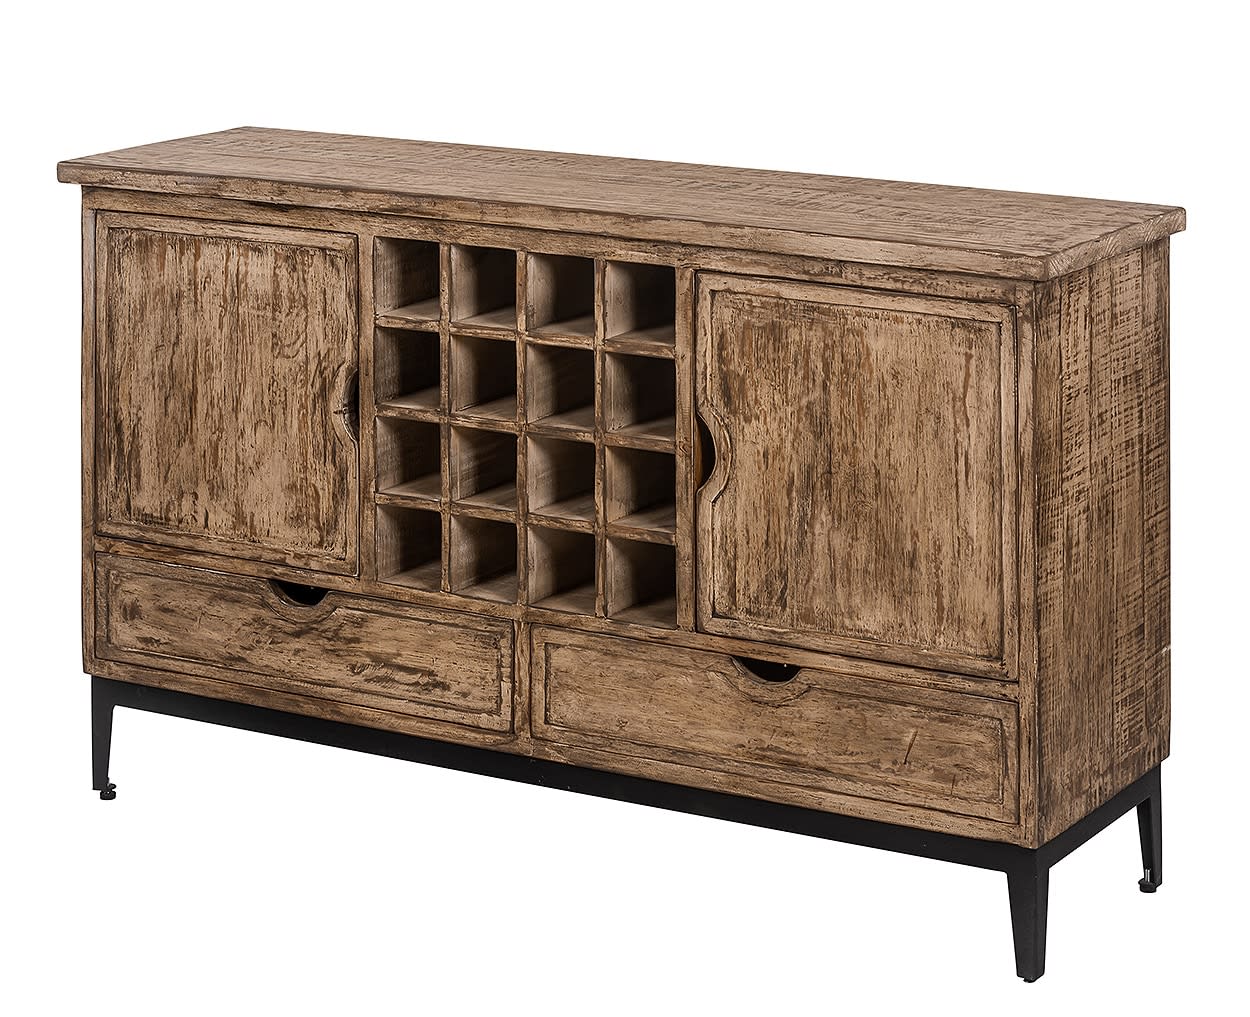 Rustic Forge Large Sideboard made of reclaimed pine wood with iron accents